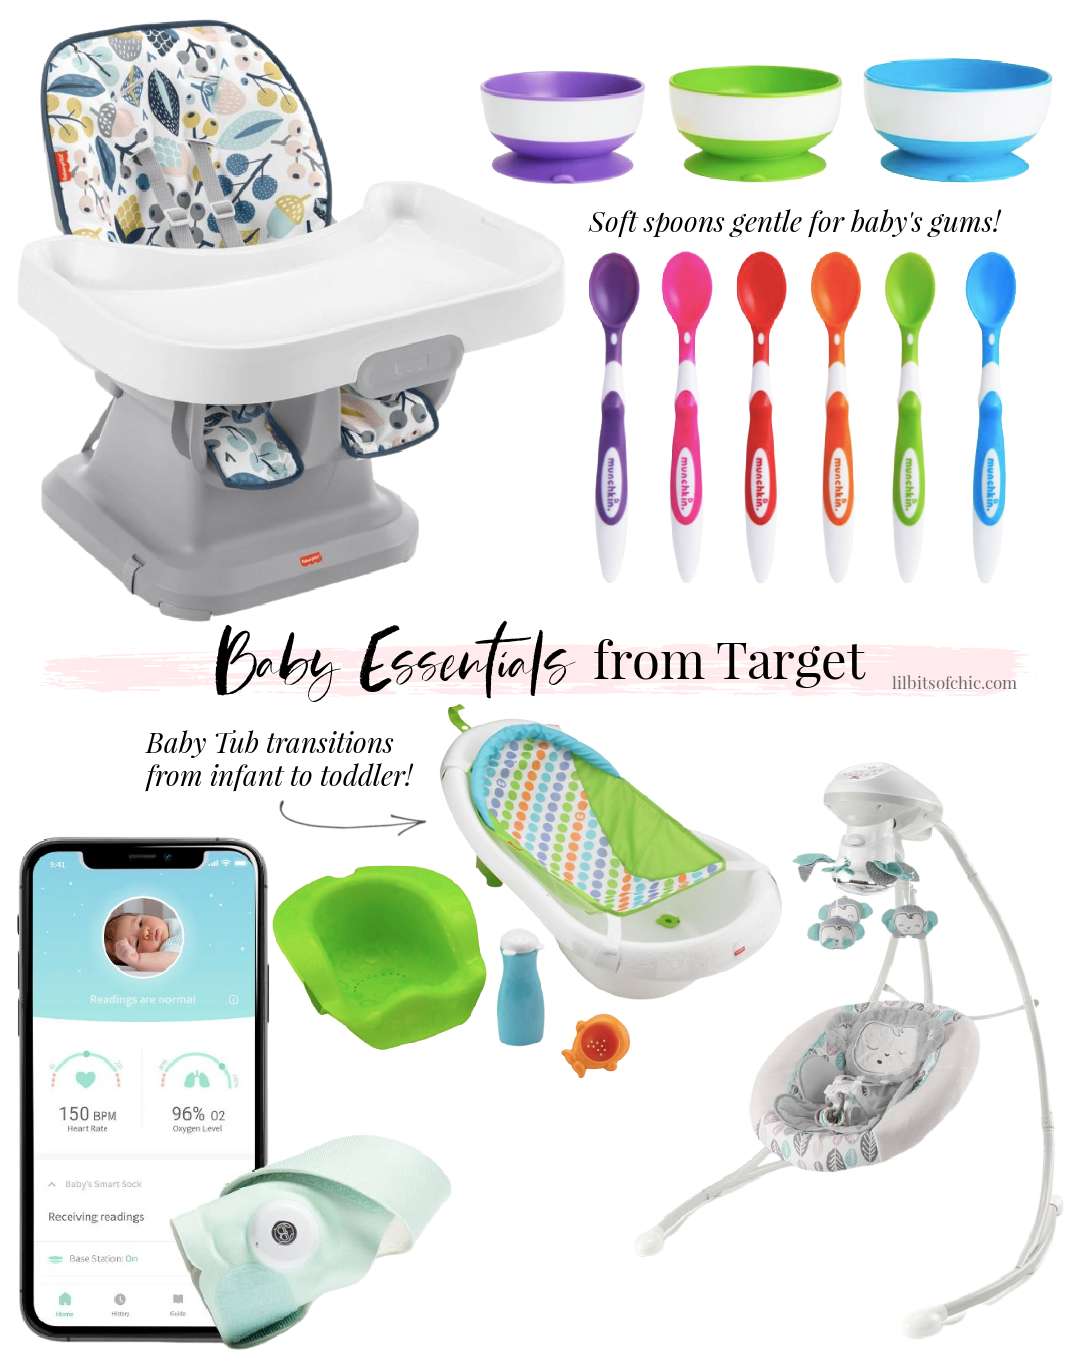 Baby Essentials from Target! - Lil bits of Chic